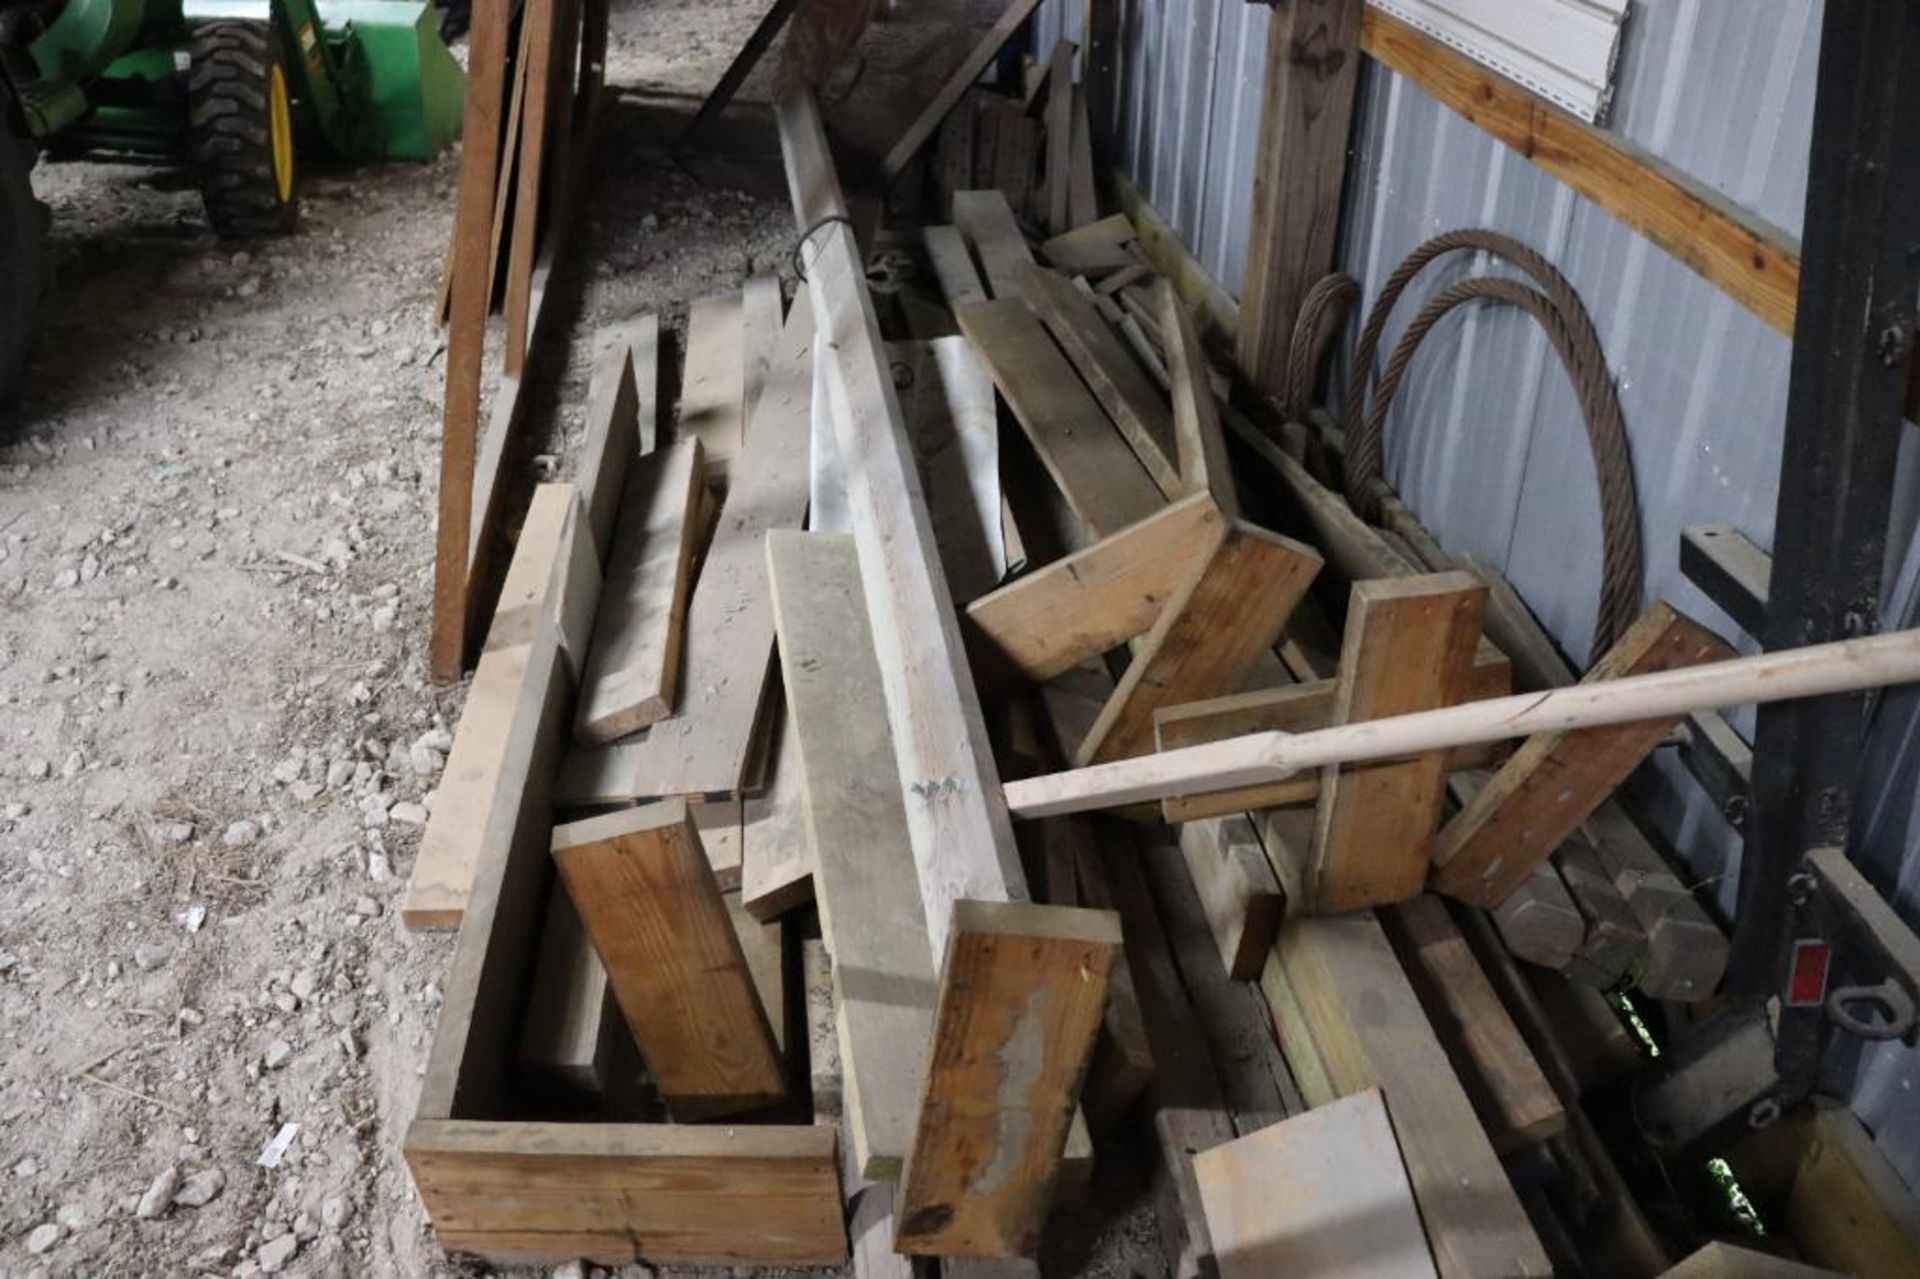 Lumber rack contents - Image 2 of 24